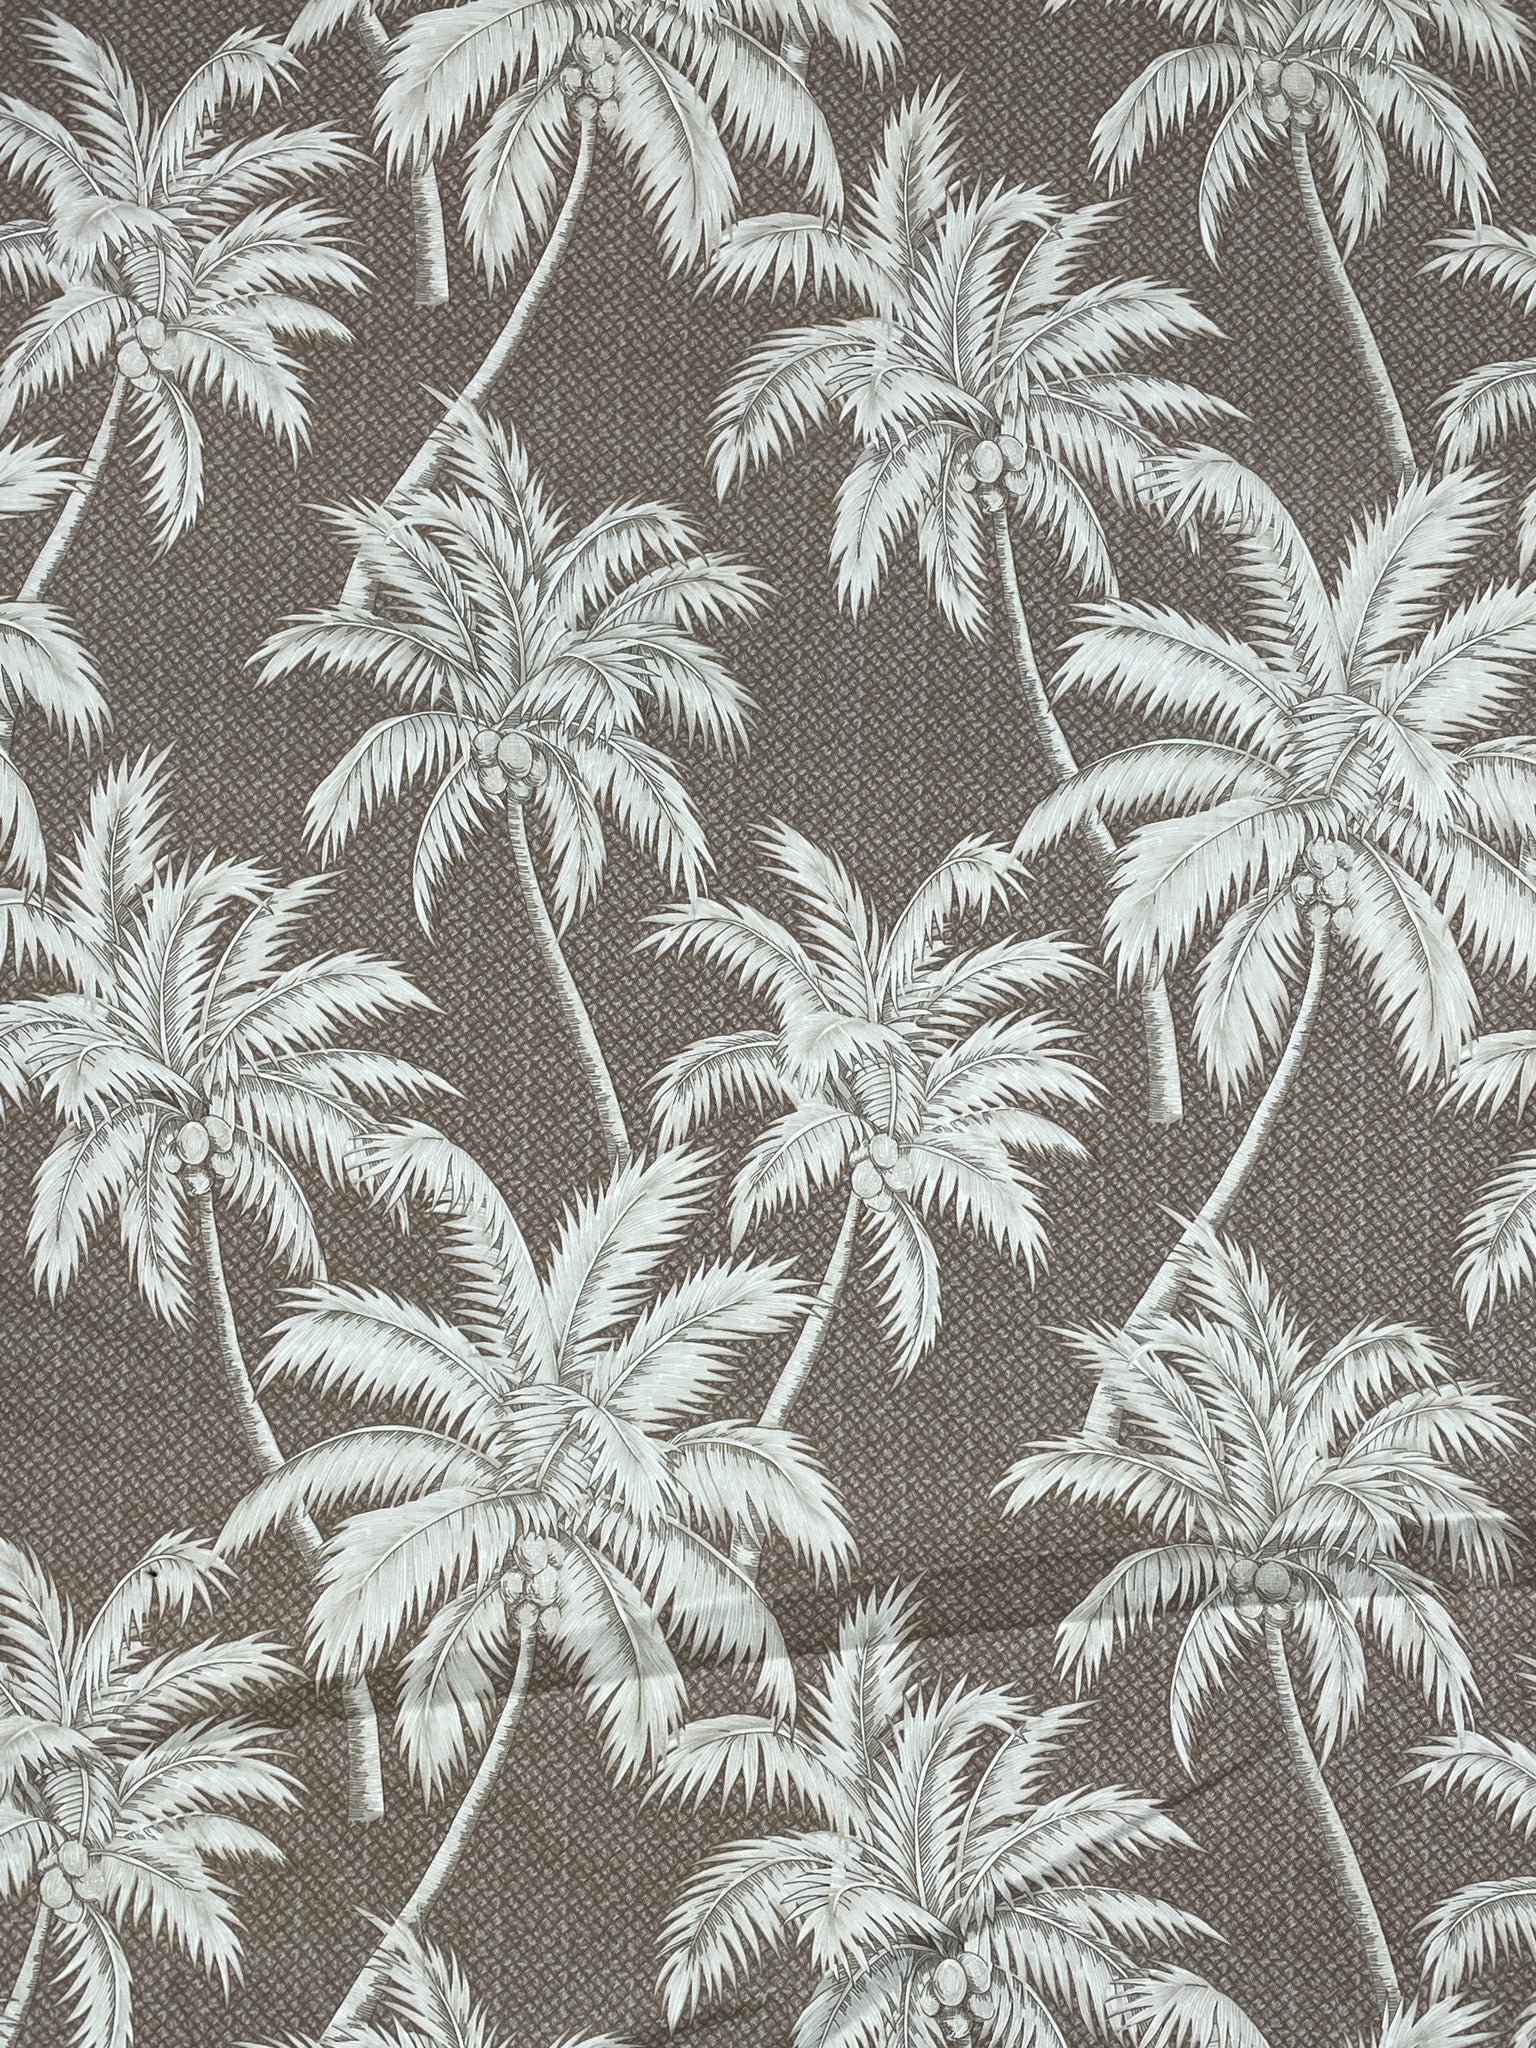 2004 Cotton Lightweight Twill - Tan Lattice with Off White Palm Trees